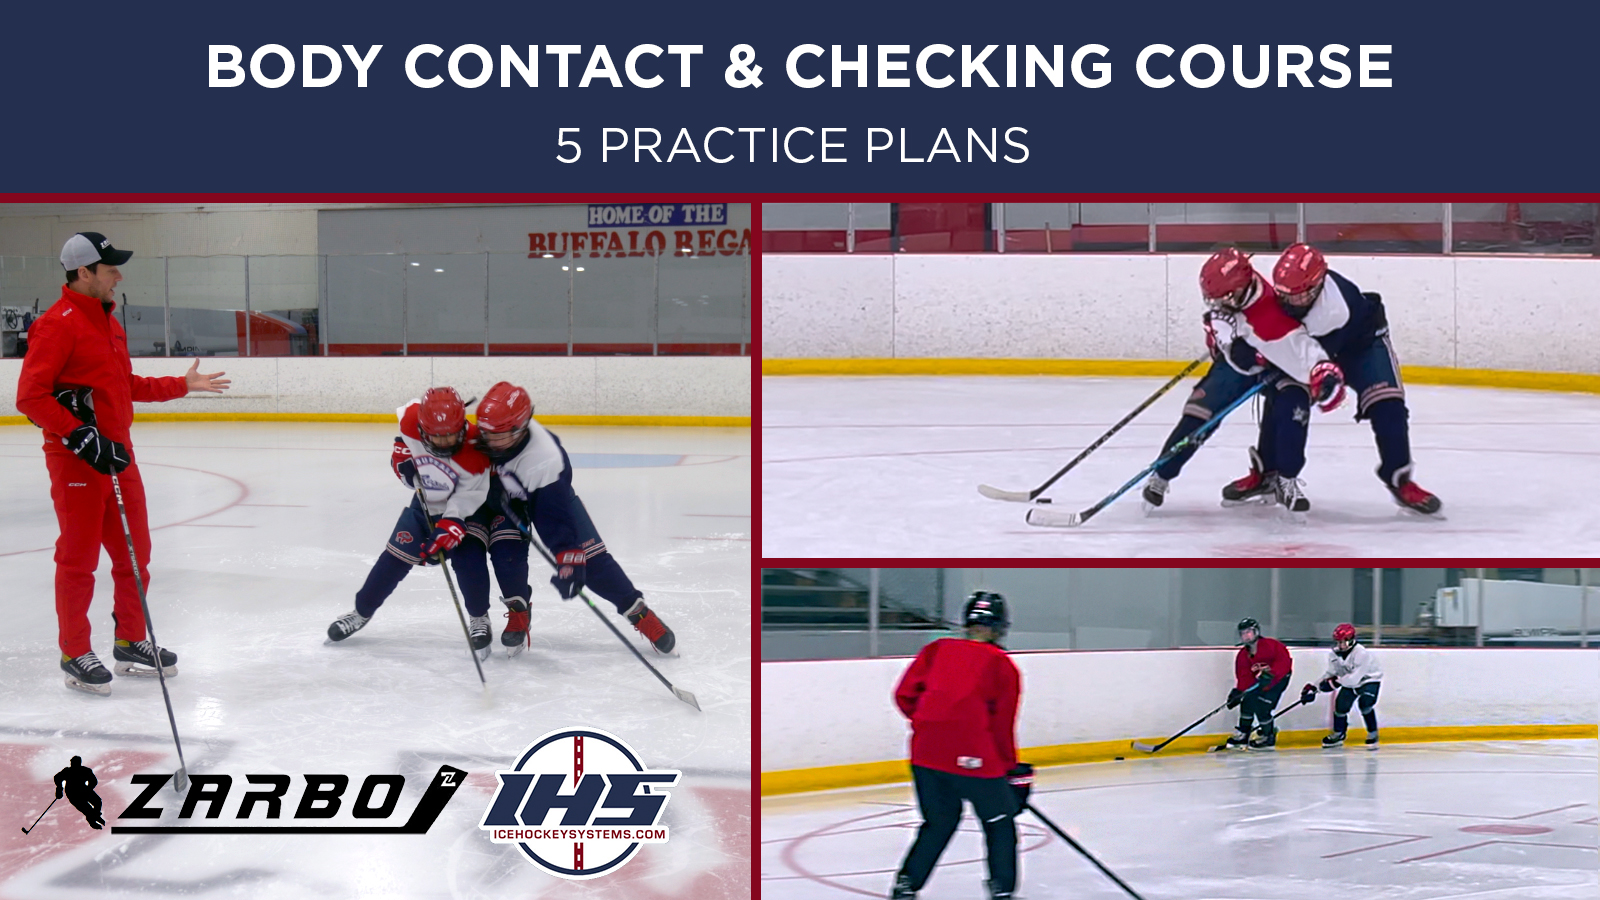 Intro to Body Contact & Checking Course: 5 Practice Plans